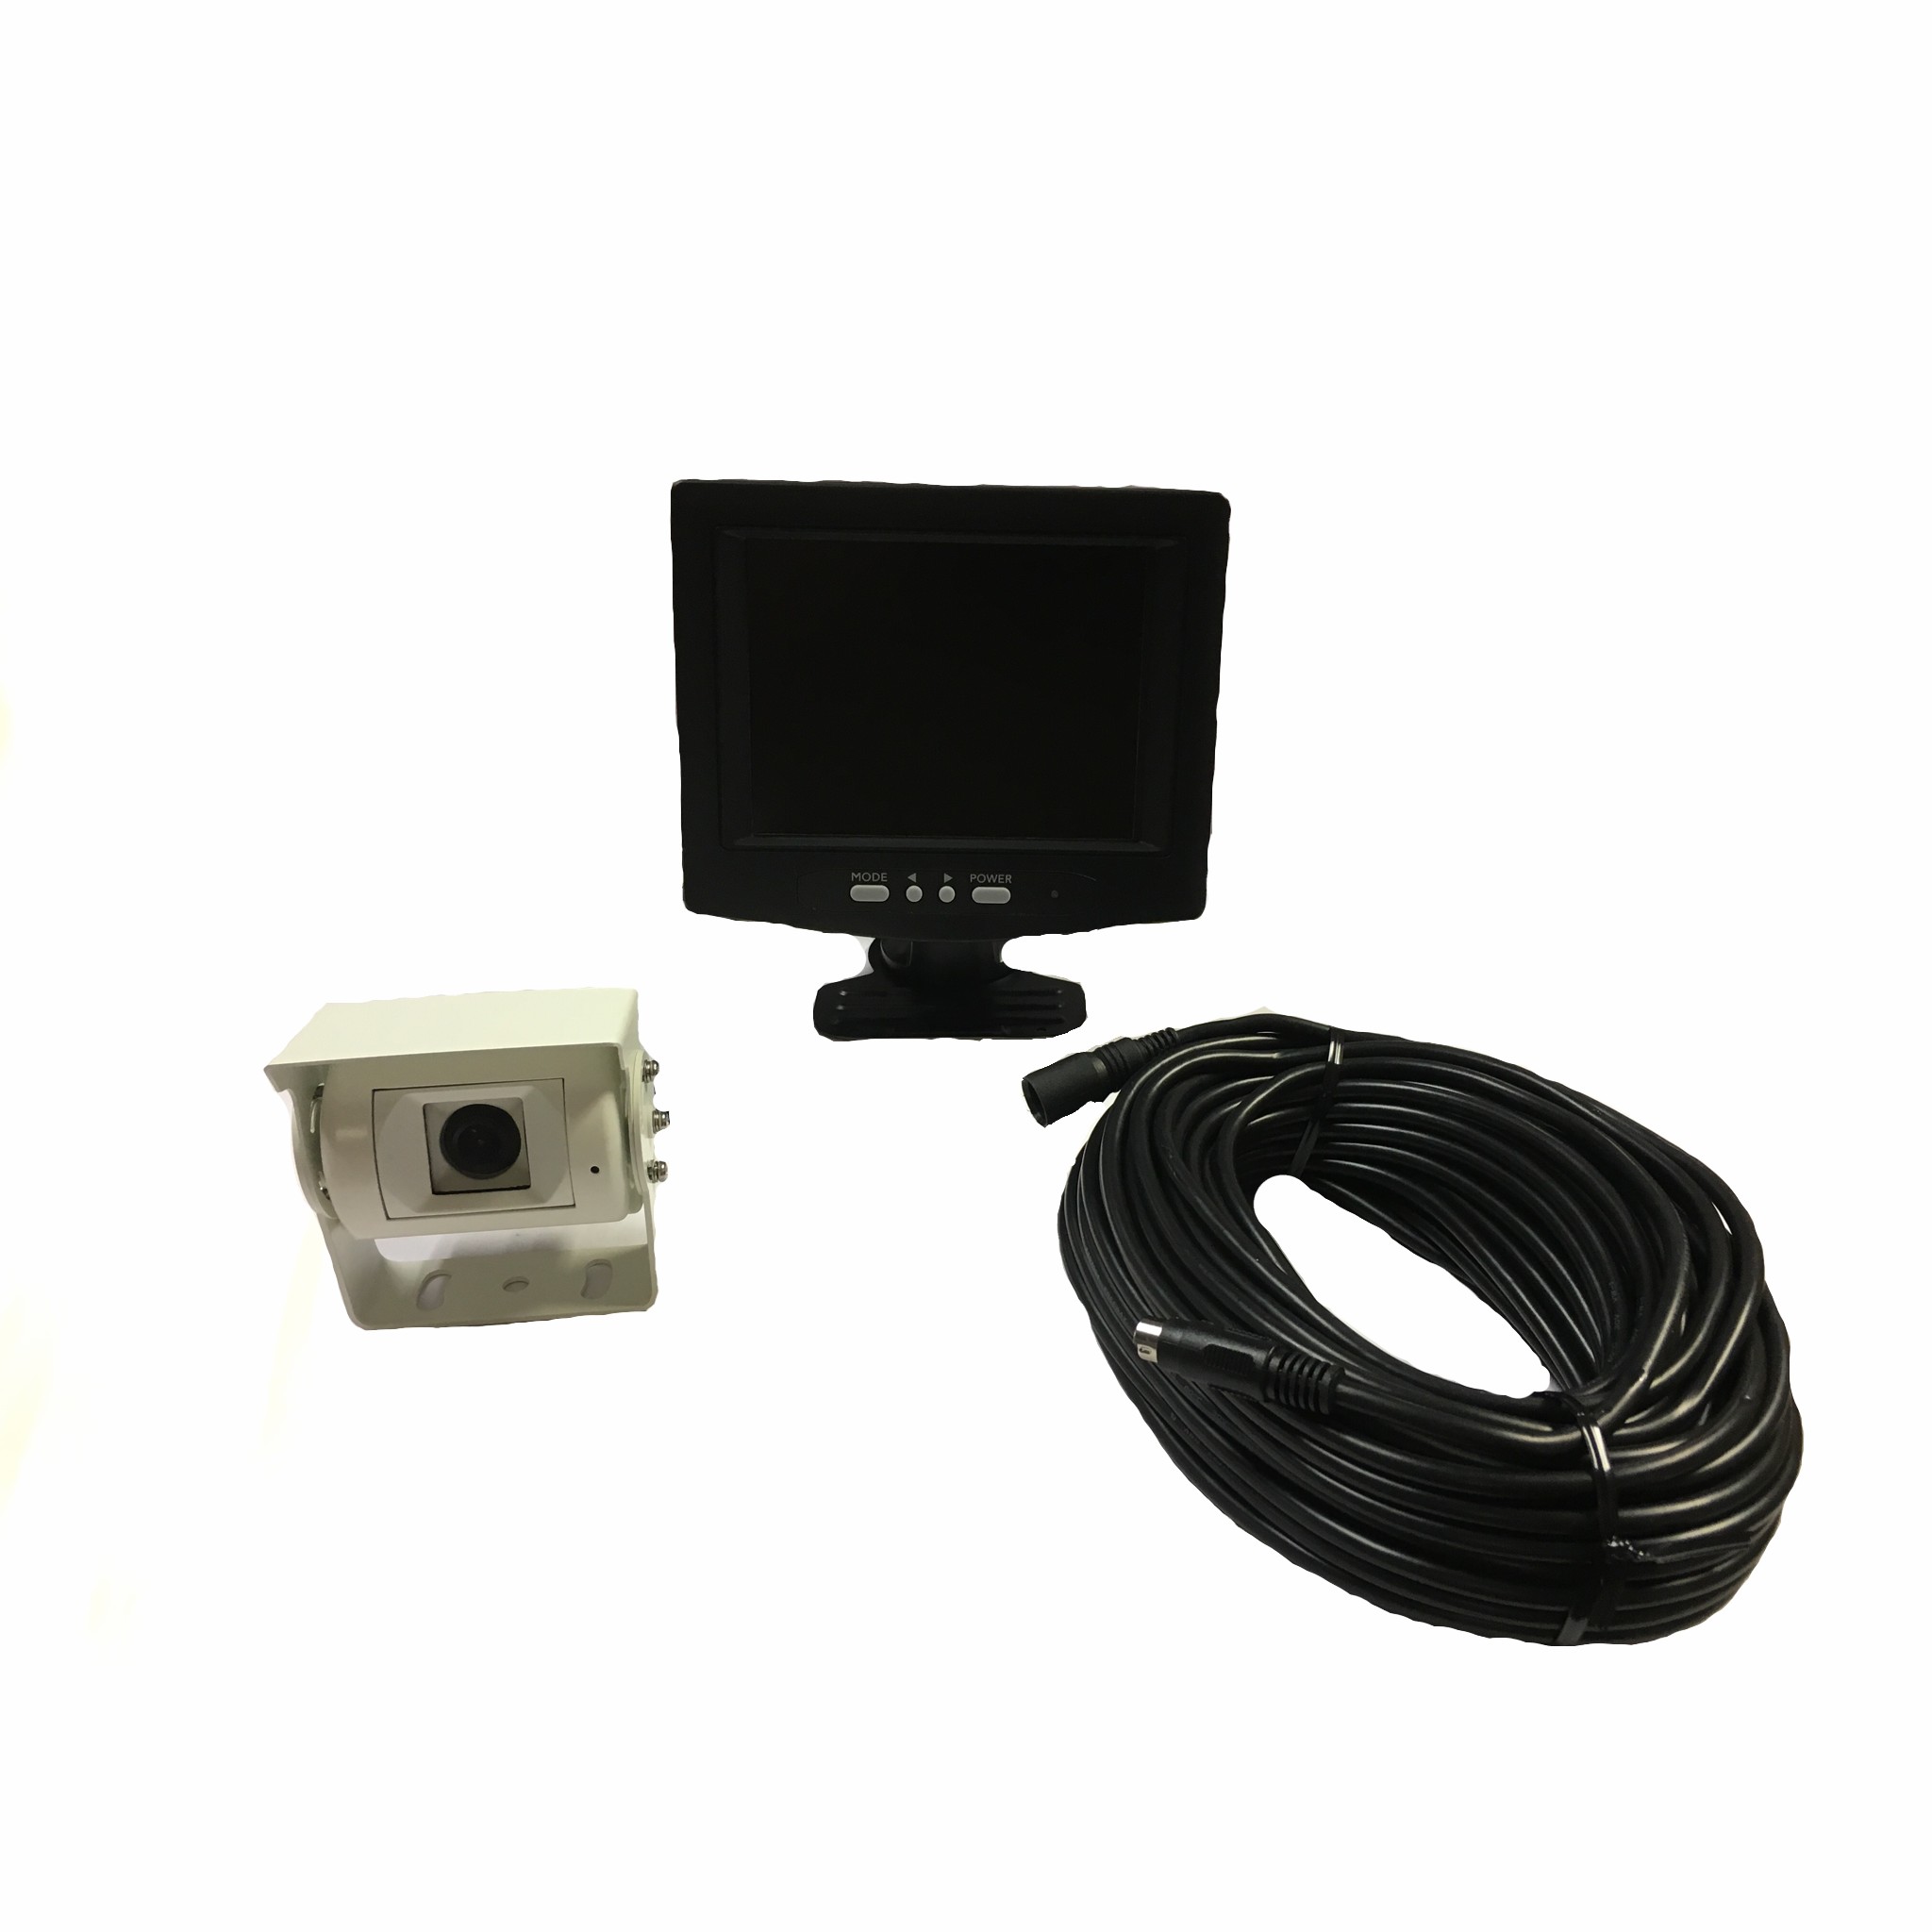 5.6" Color Backup Camera System with Audio